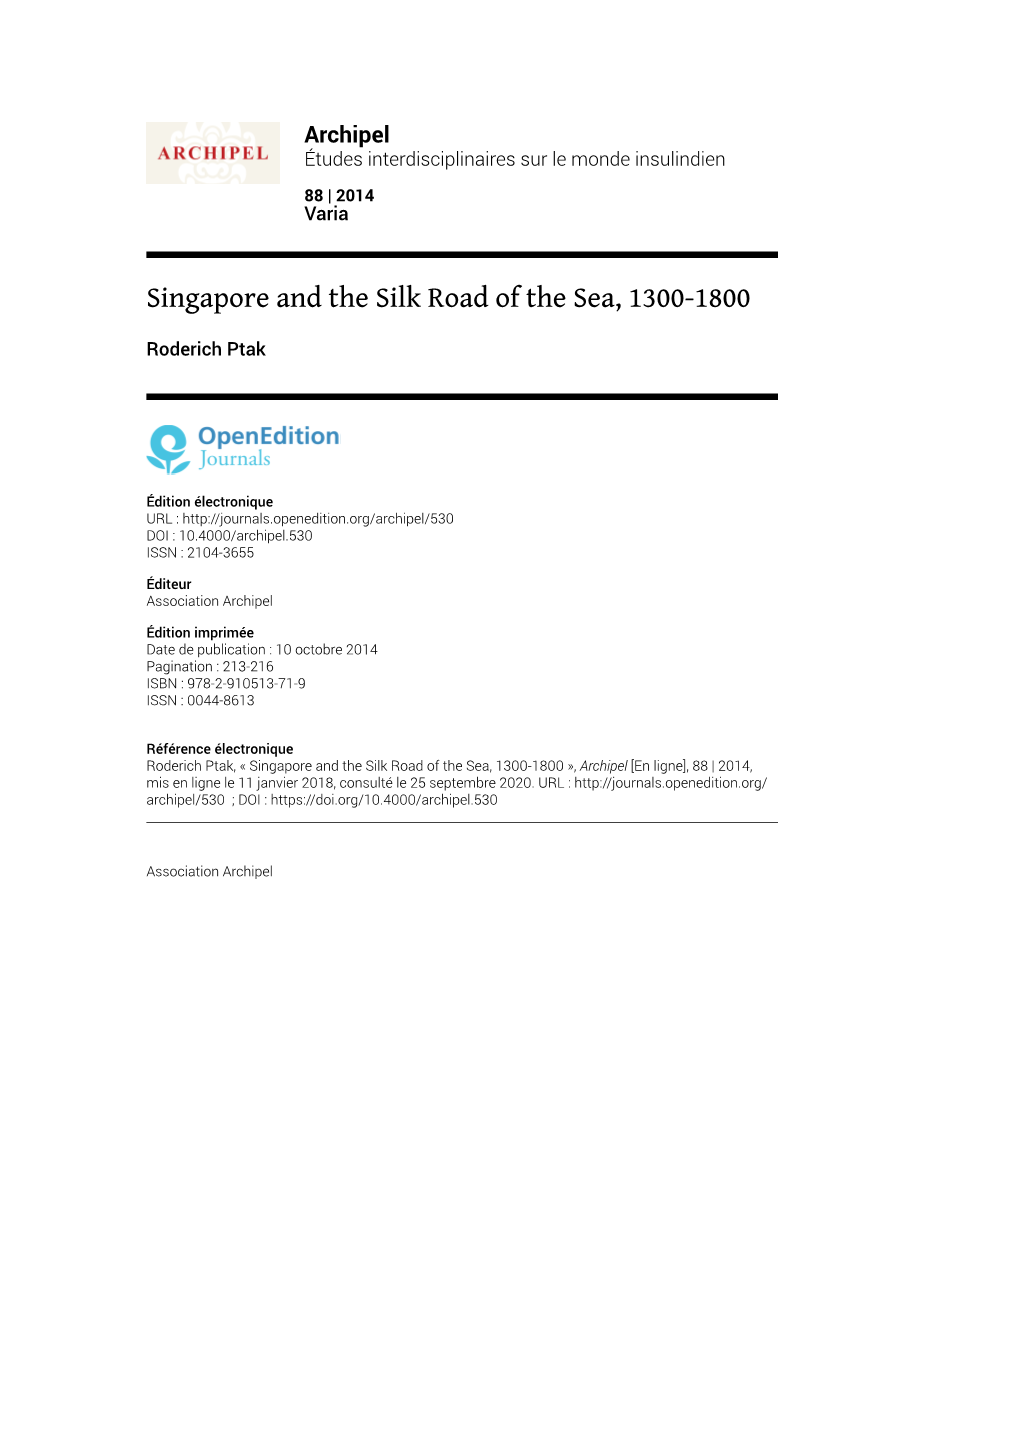 Singapore and the Silk Road of the Sea, 1300-1800